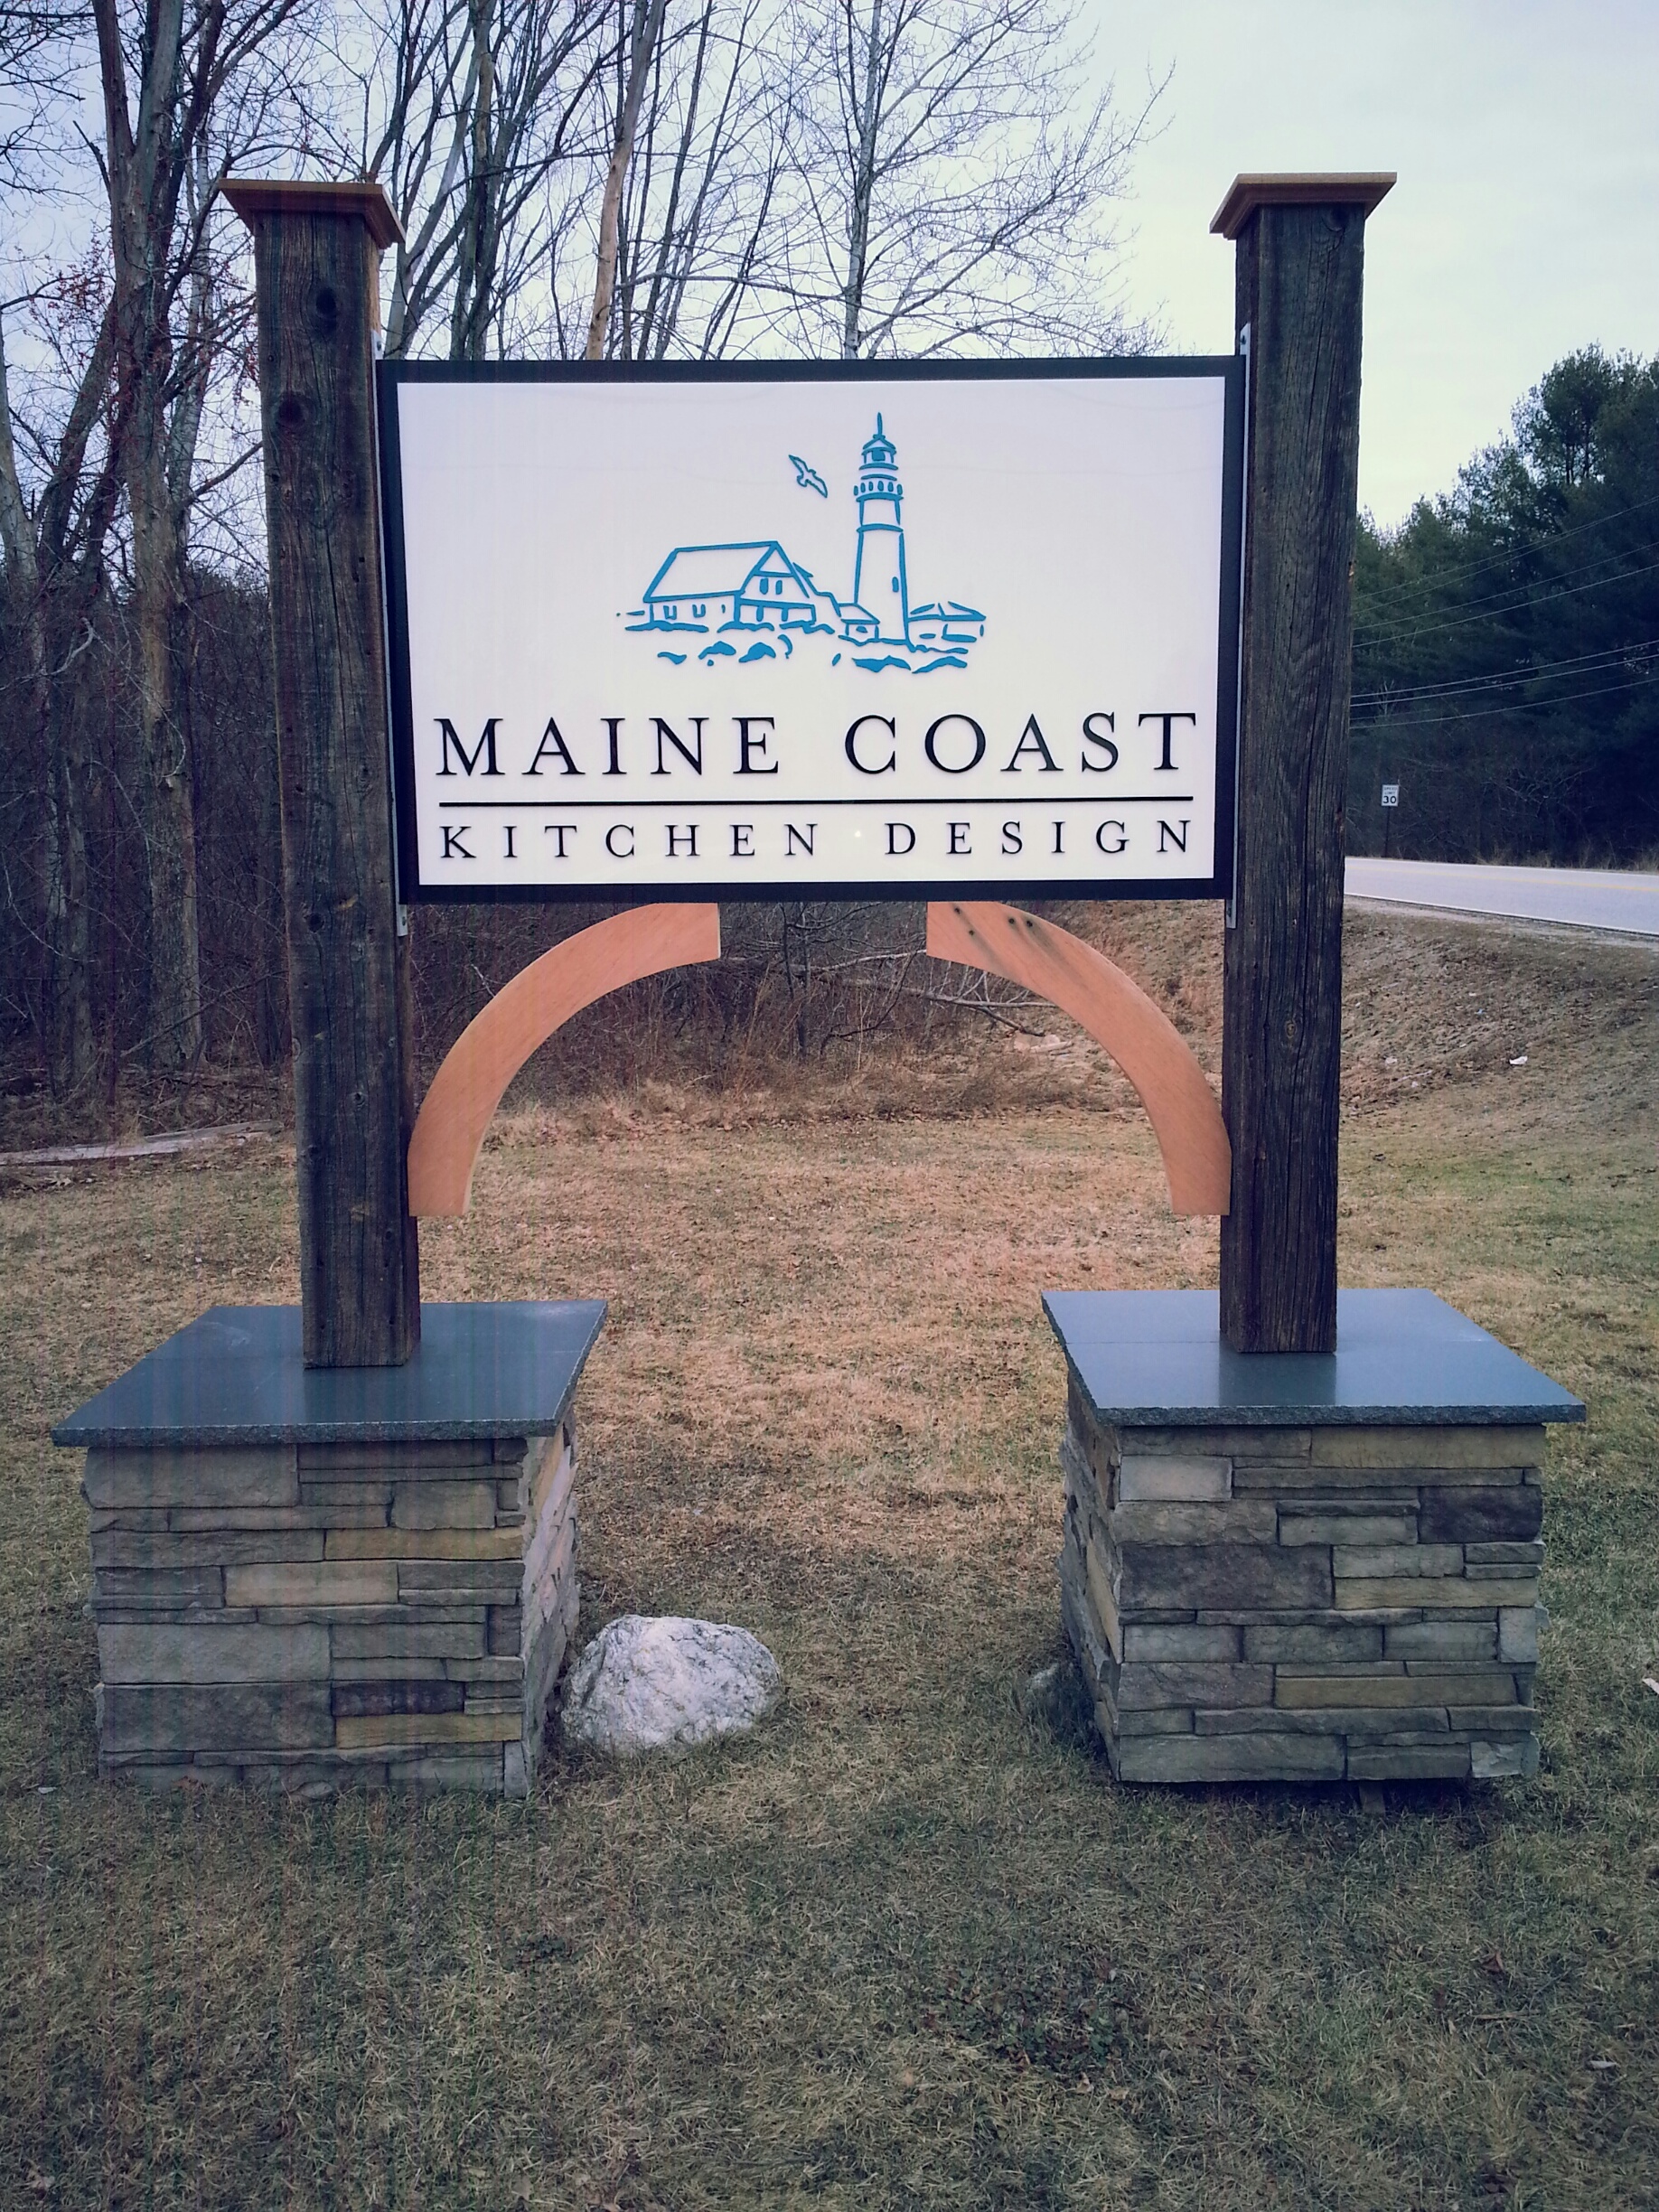 The sign is up at Maine Coast Kitchen Design's new location on Little Wing Drive in Gorham